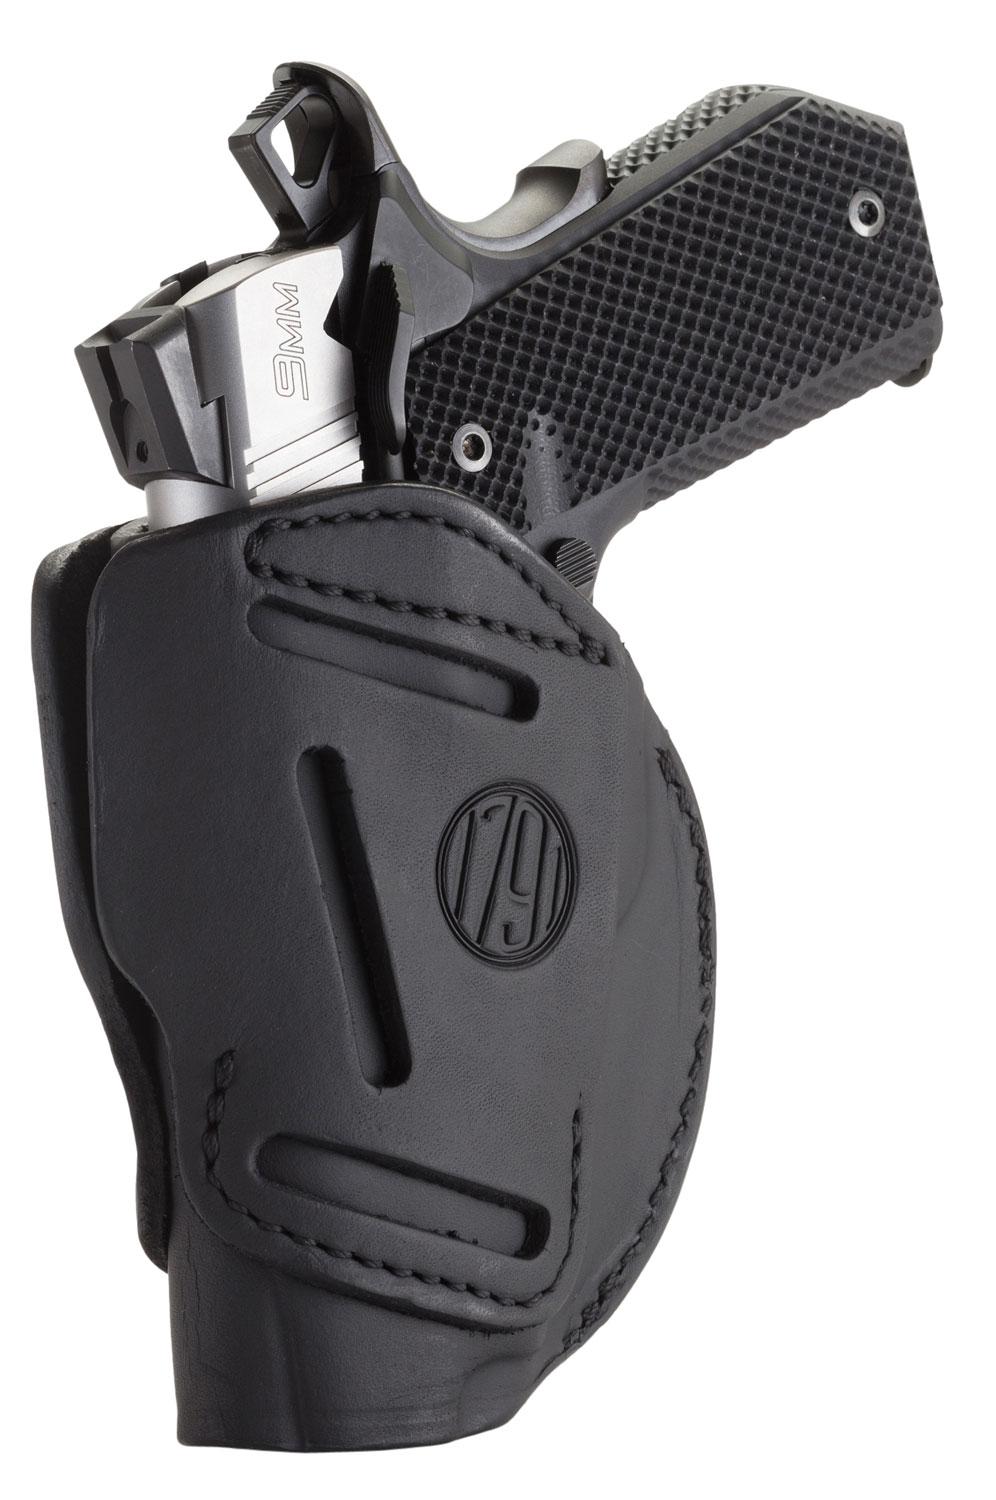  3 Way Holster Ax Size 1 Stealth Black